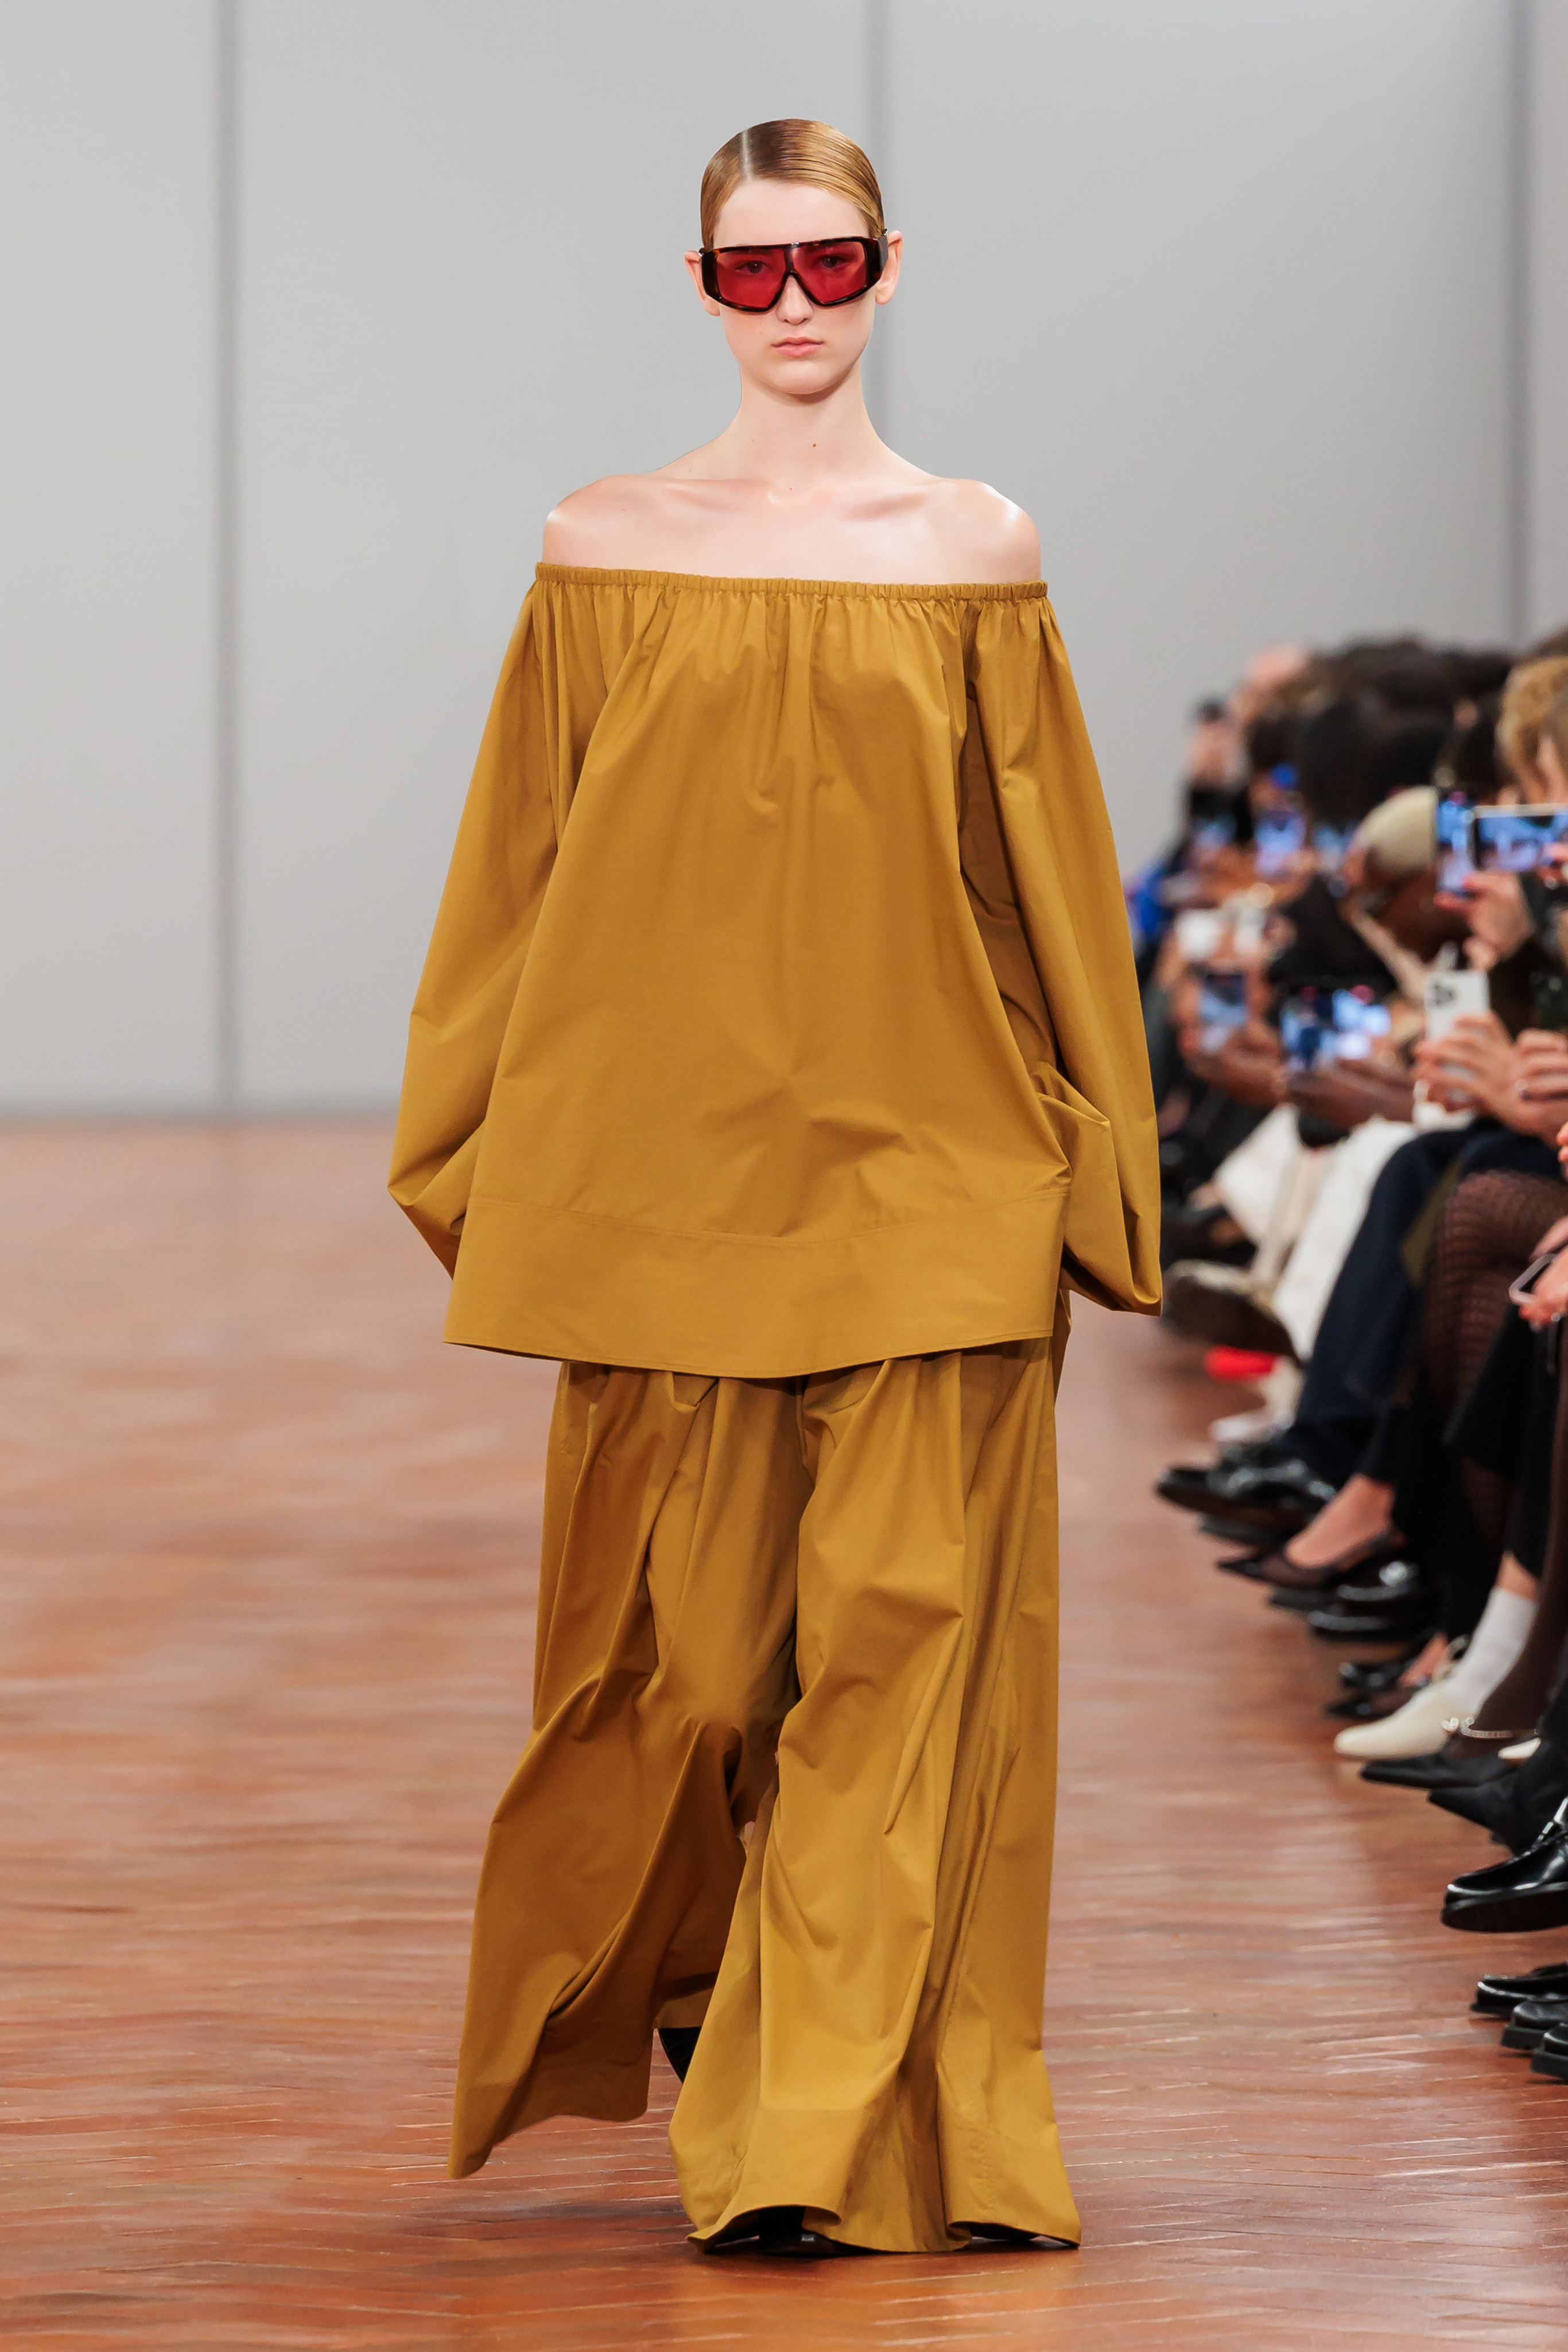 Model on runway wearing an off-shoulder, voluminous top with matching trousers and red sunglasses